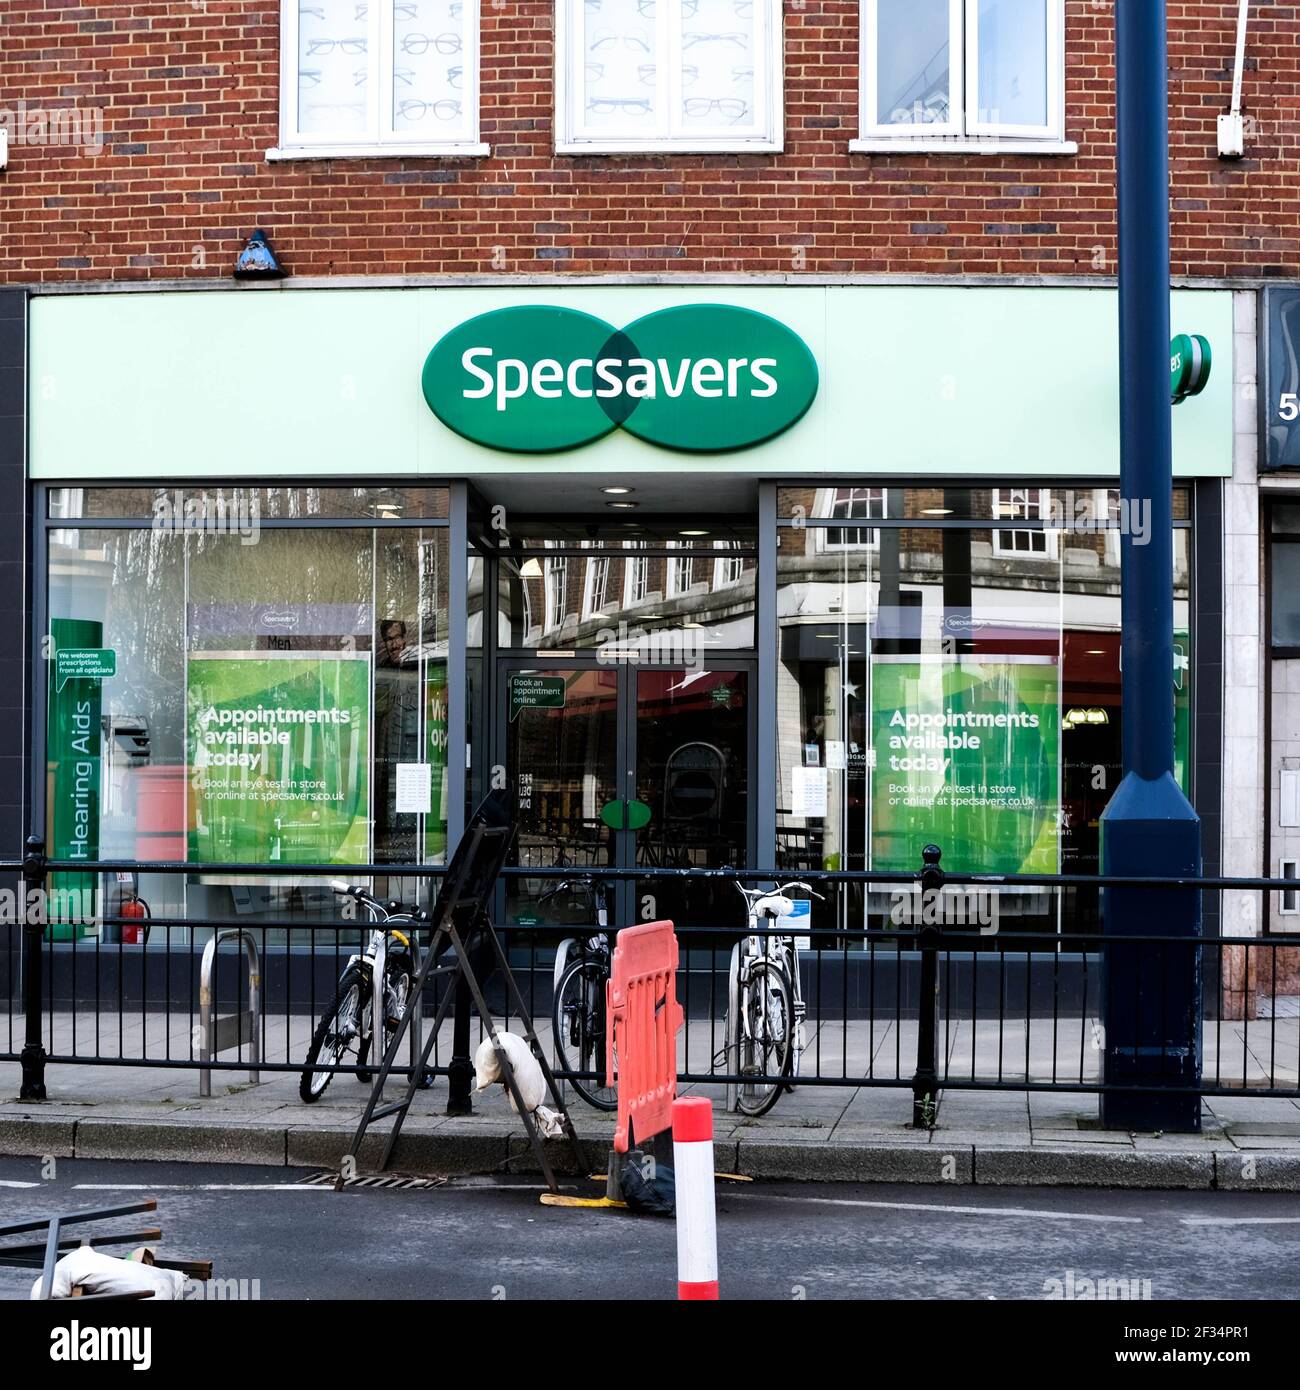 London UK, March 15 2021, Specsavers Retail Opticians High Street Shop Or Store Stock Photo